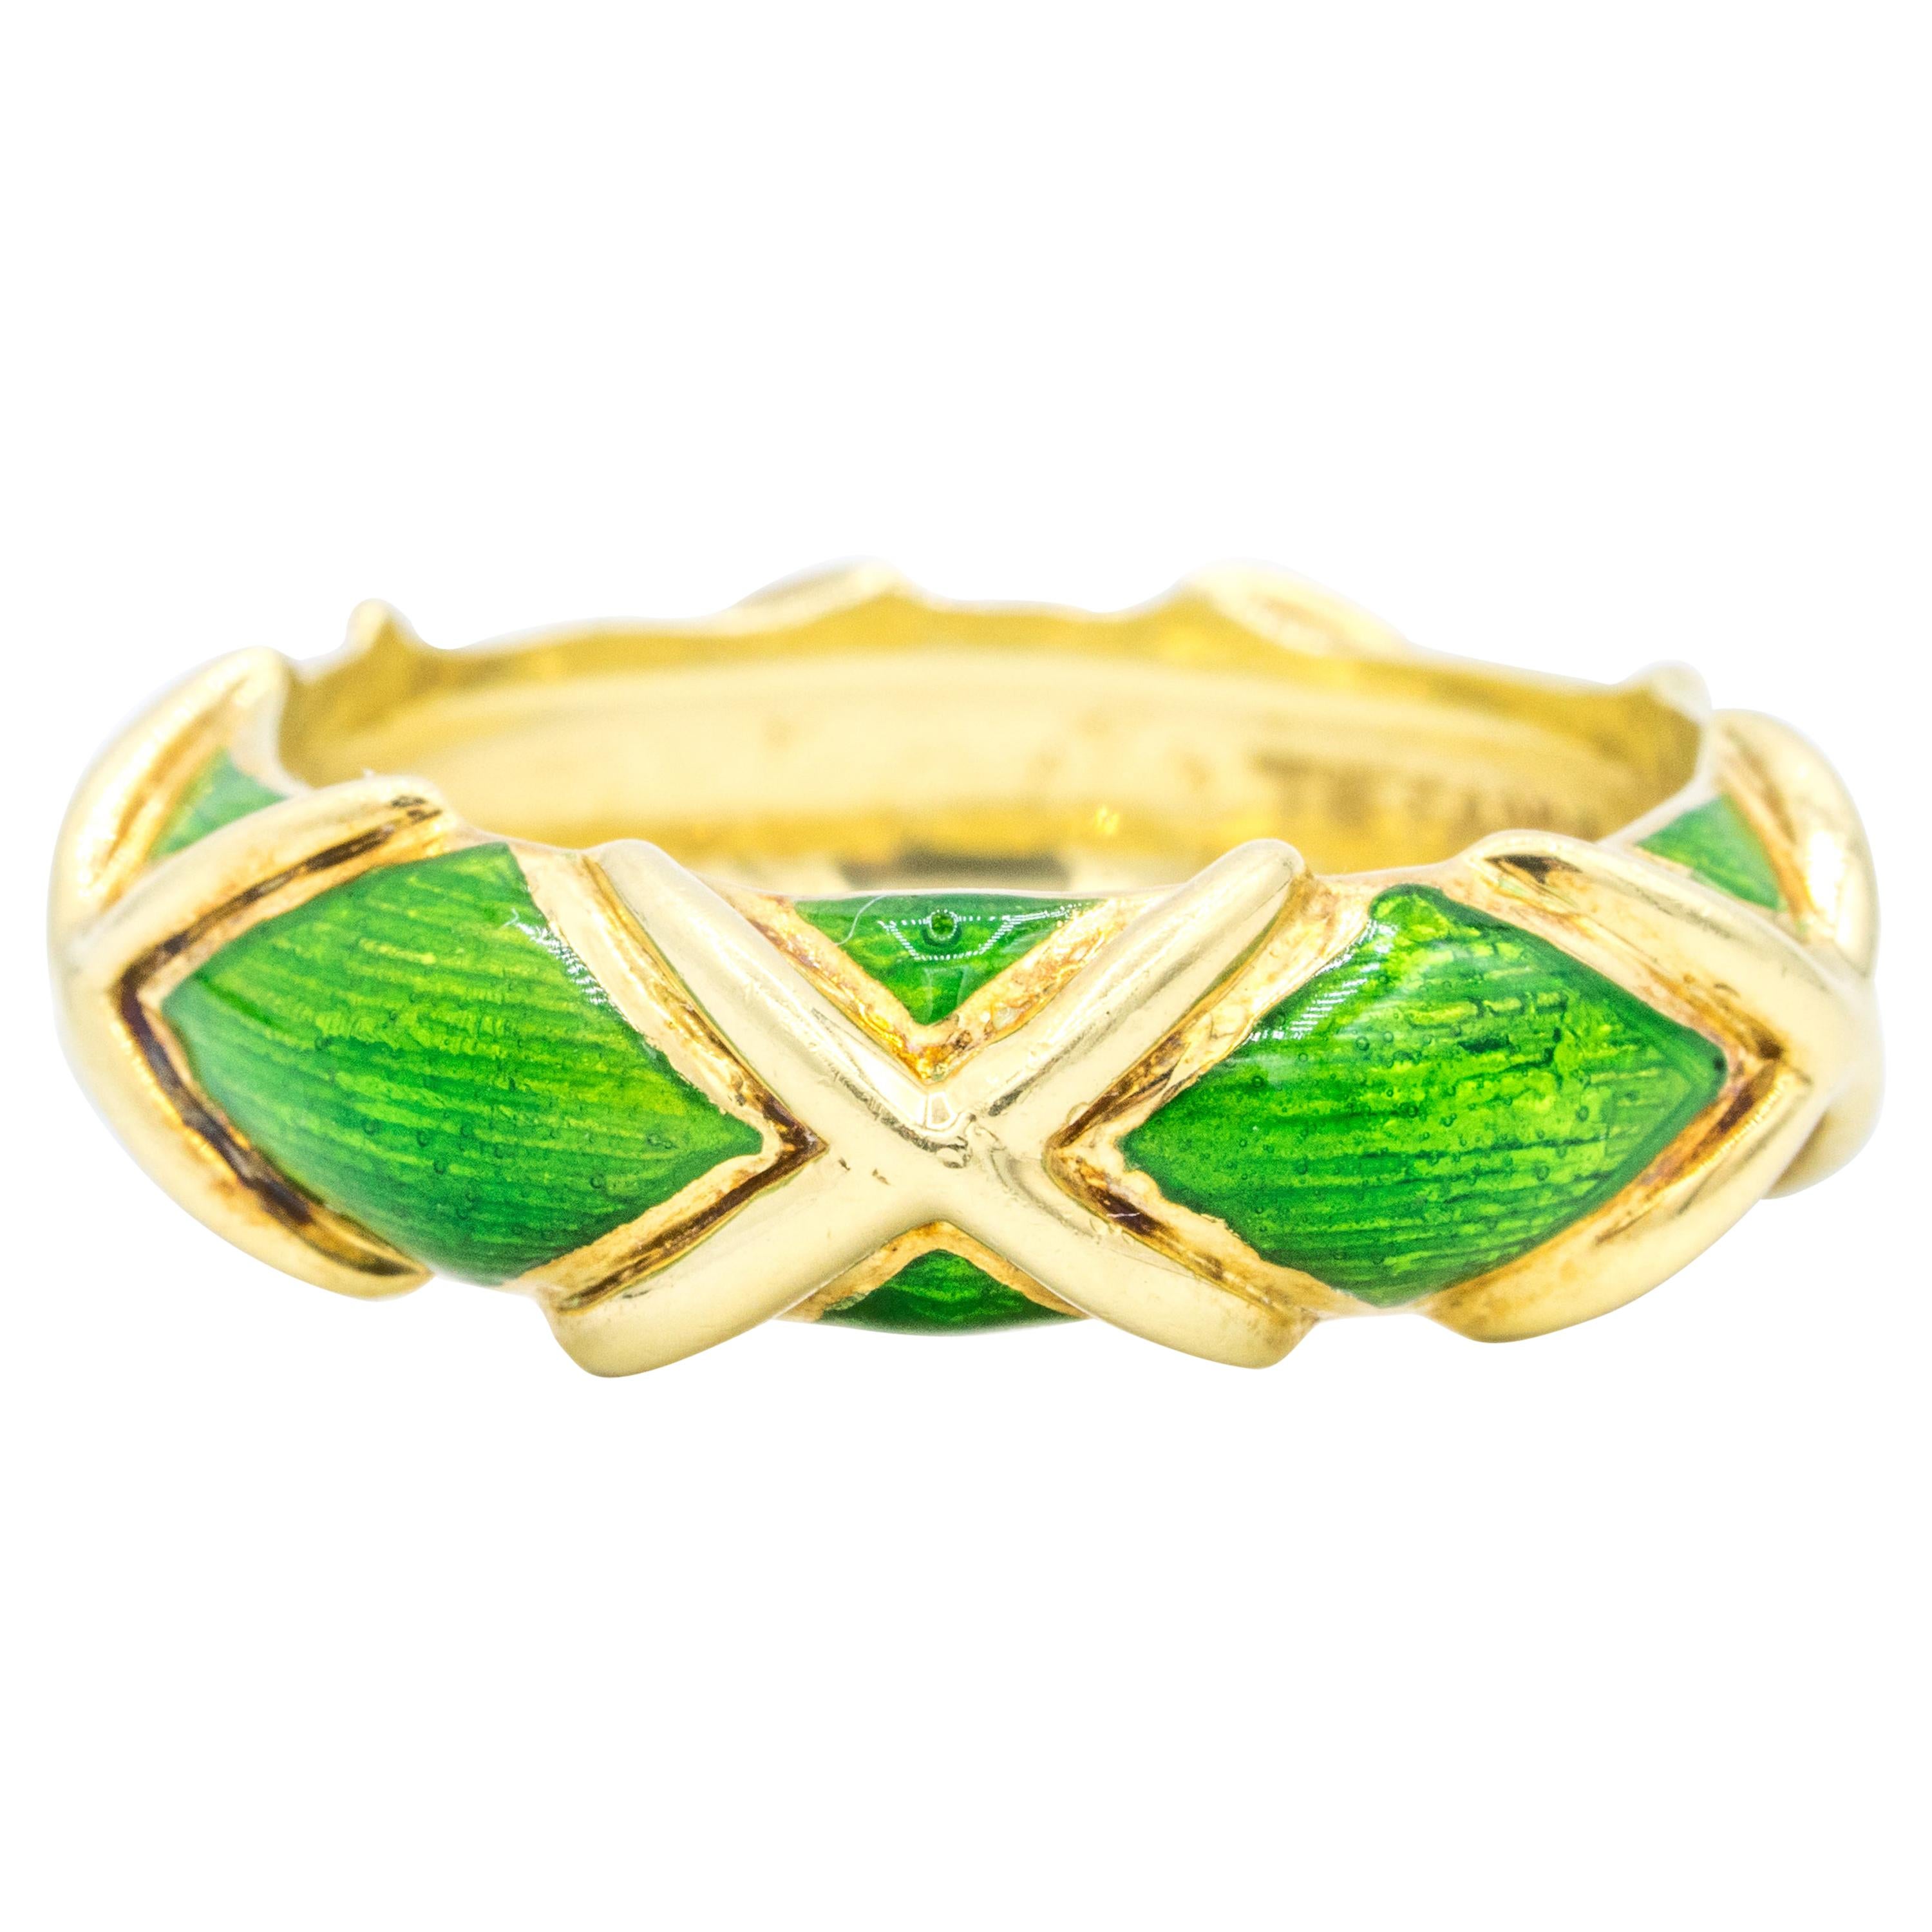 Schlumberger for Tiffany & Co. 18k Gold 'X' and Green Enamel Design, circa 1960s